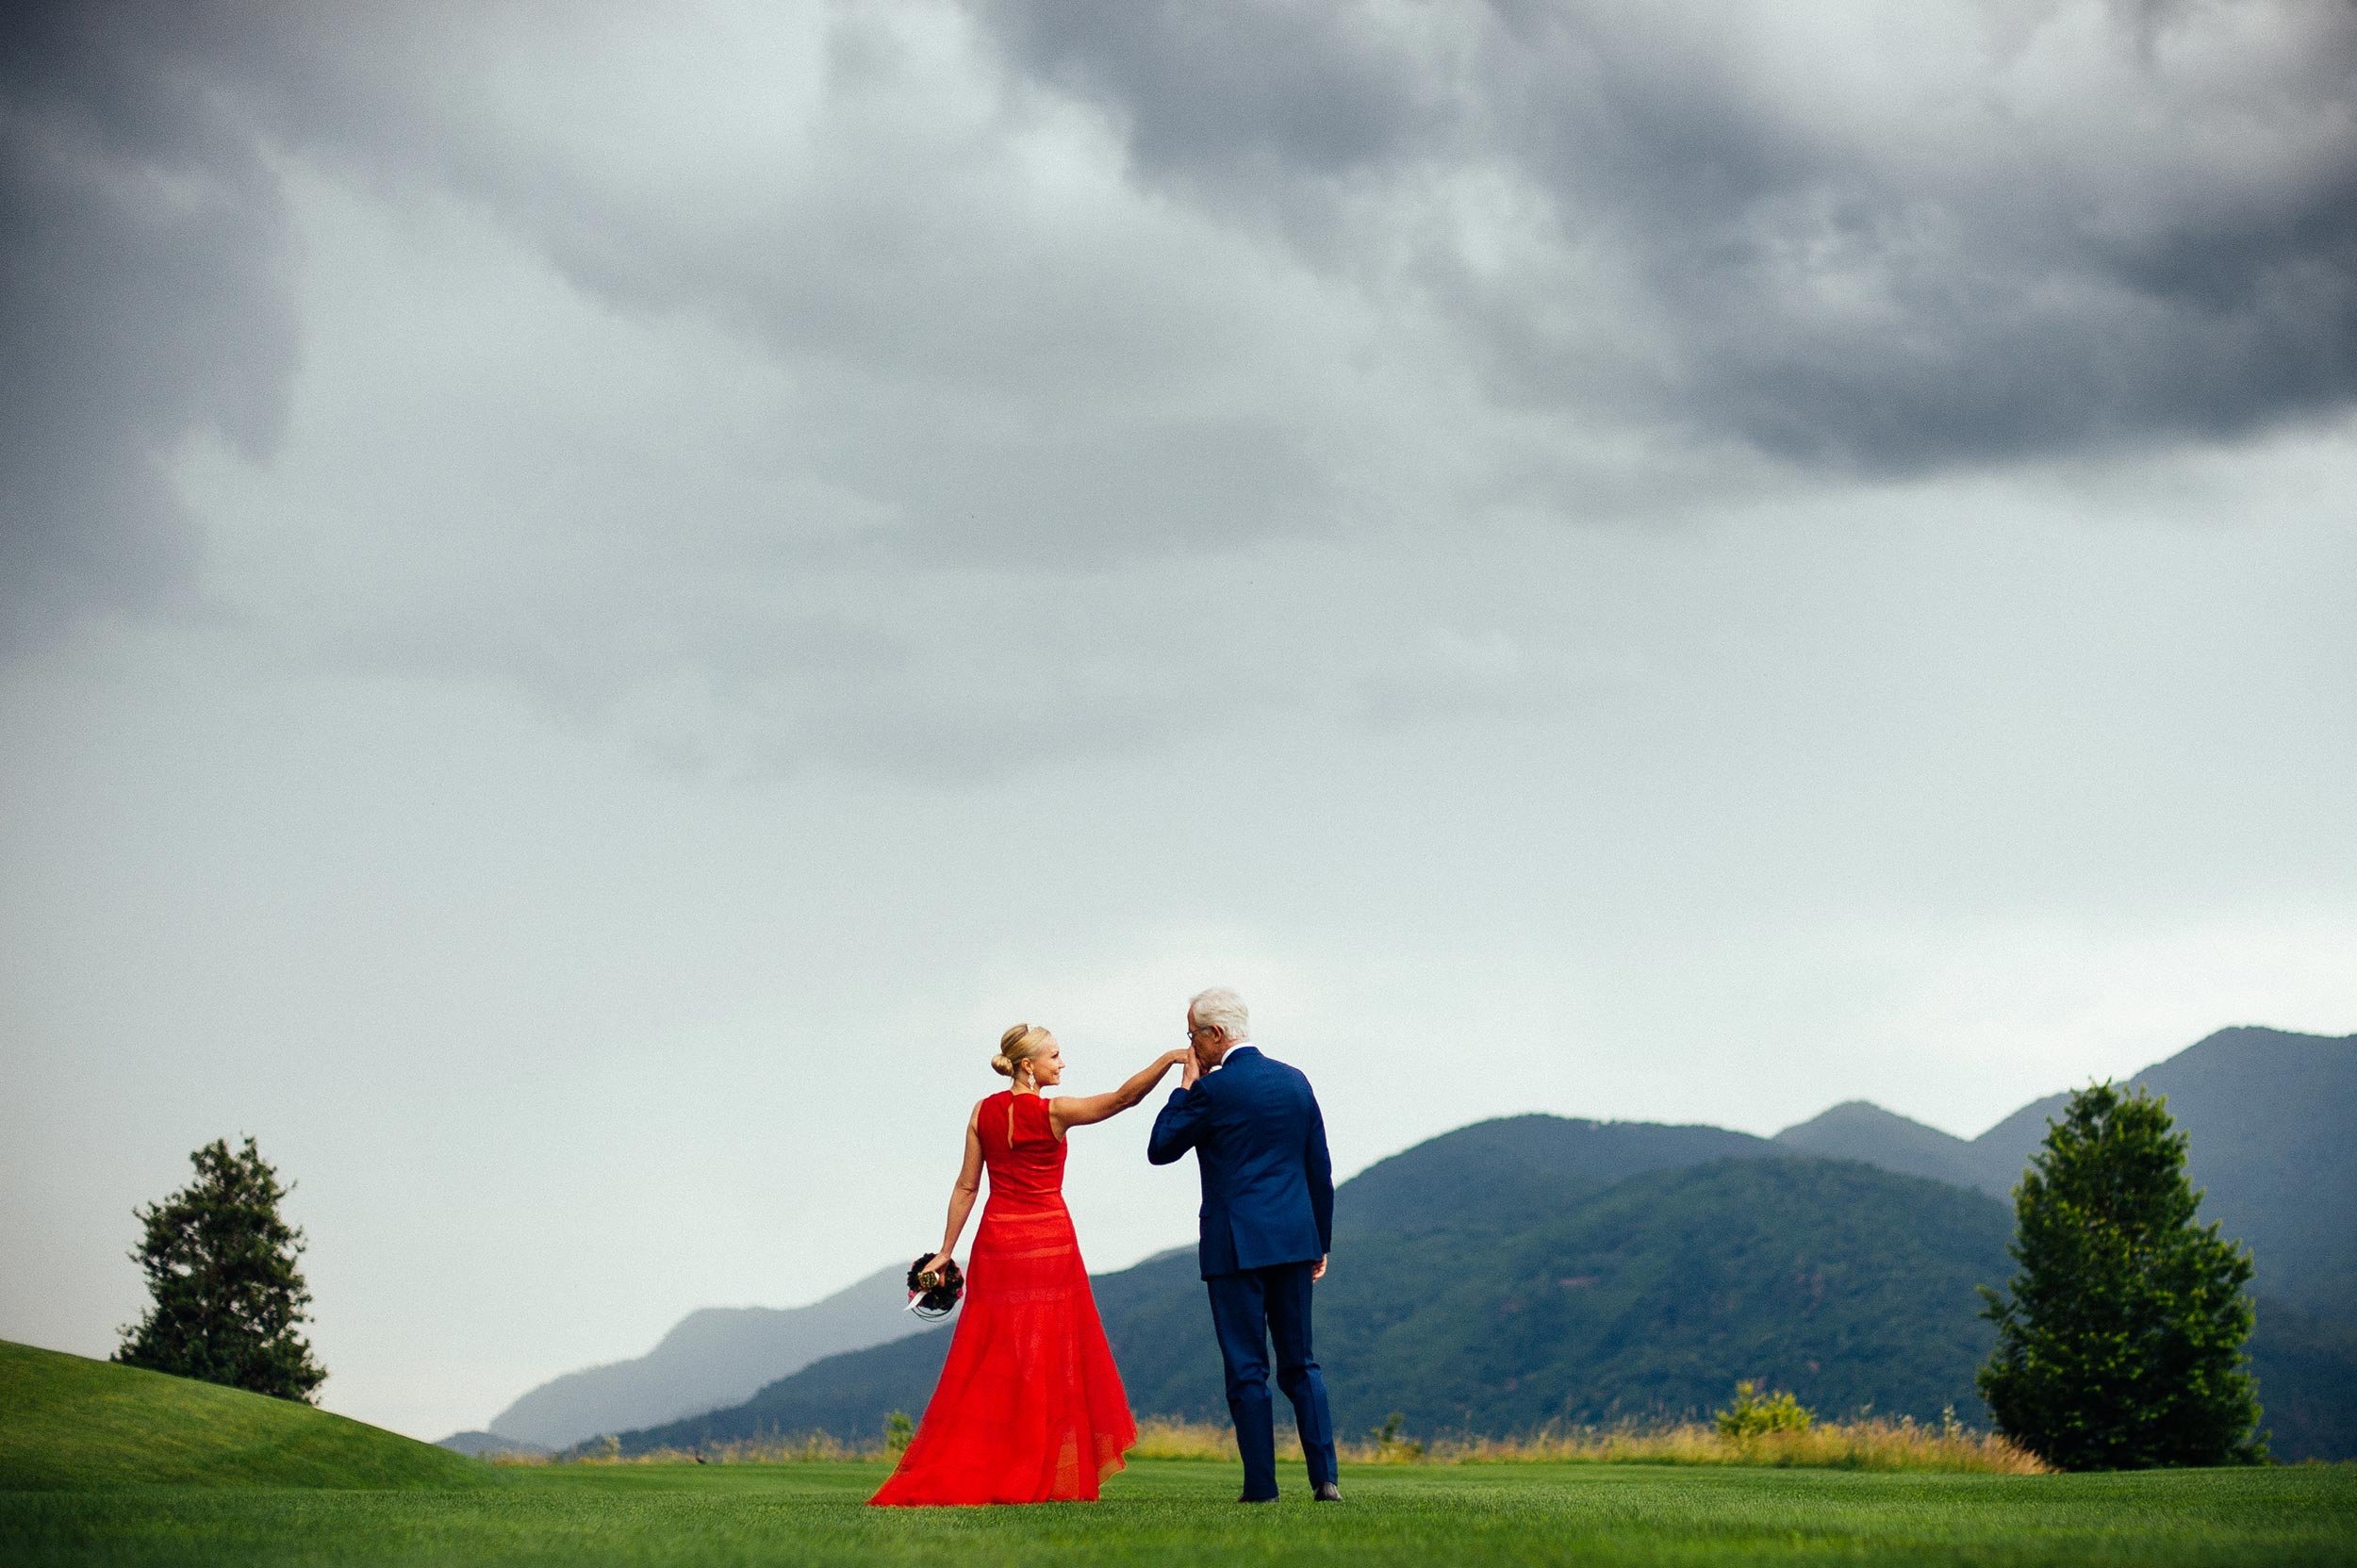 groom-in-blue-kisses-the-bride-with-red-wedding-dress-on-a-green-grass-field-lugano-switzerland.jpg